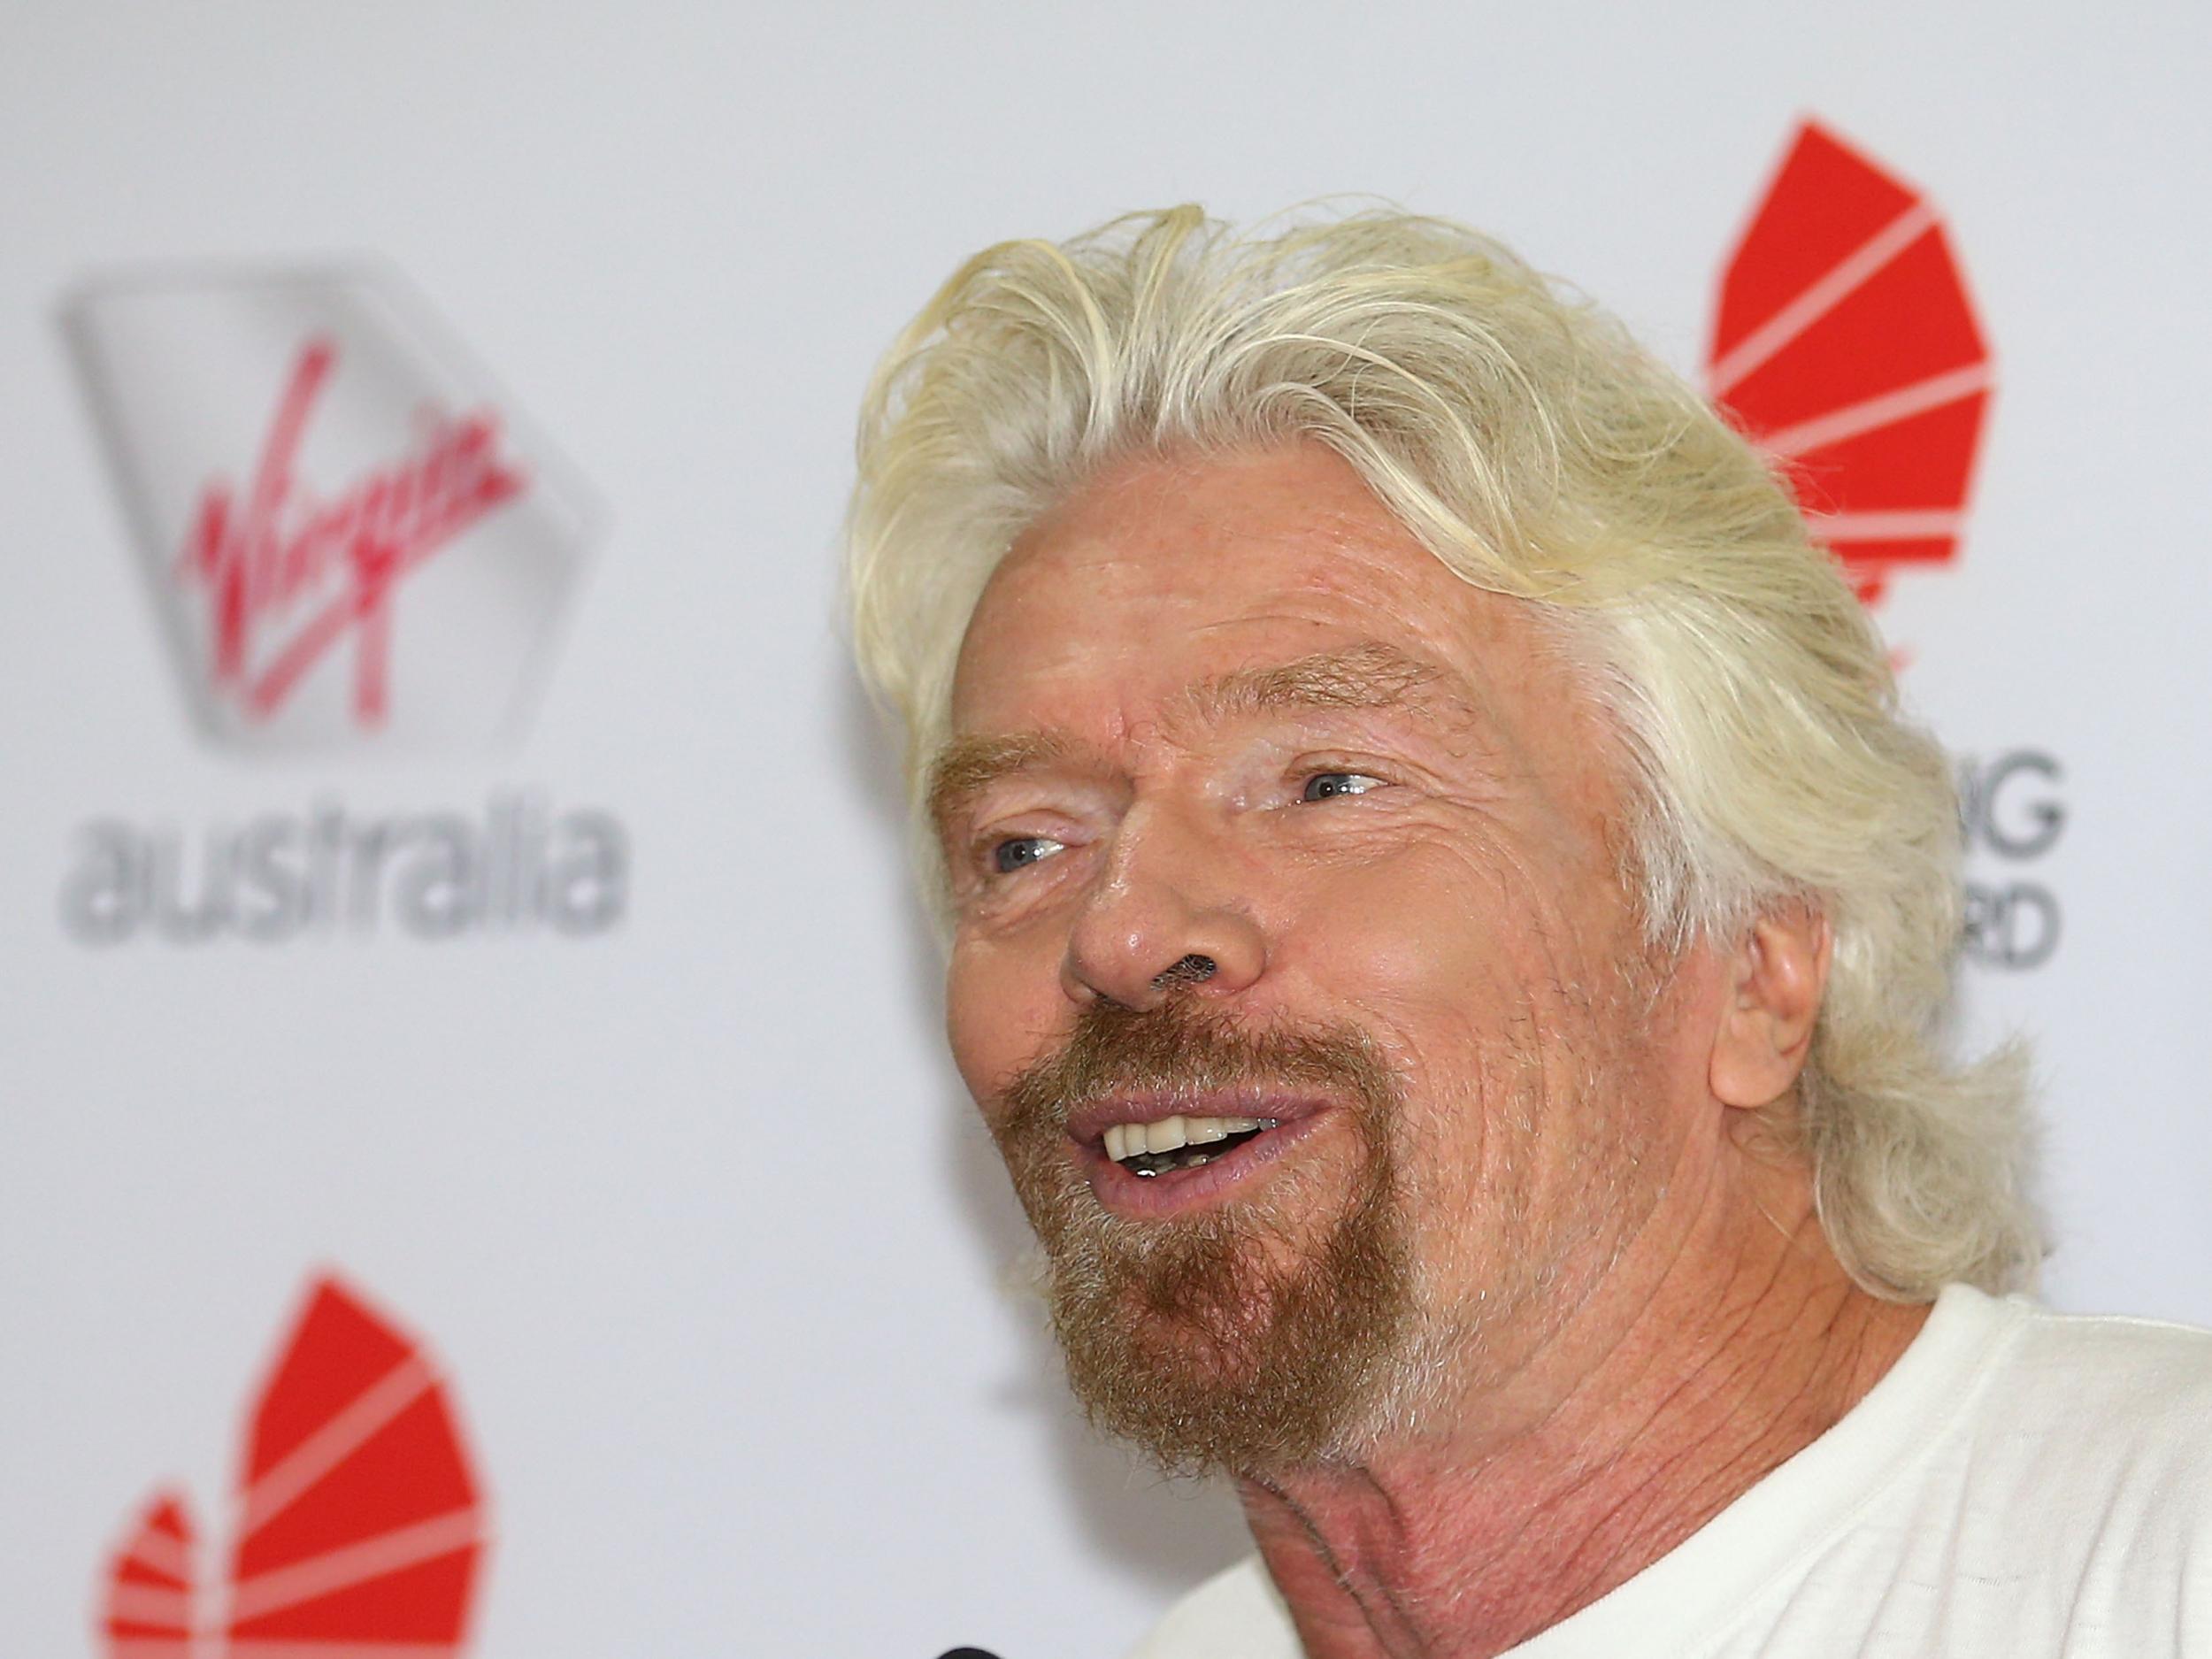 Branson: 'I believe that in 30 years or so we will no longer need to kill any animals and that all meat will either be clean or plant-based'